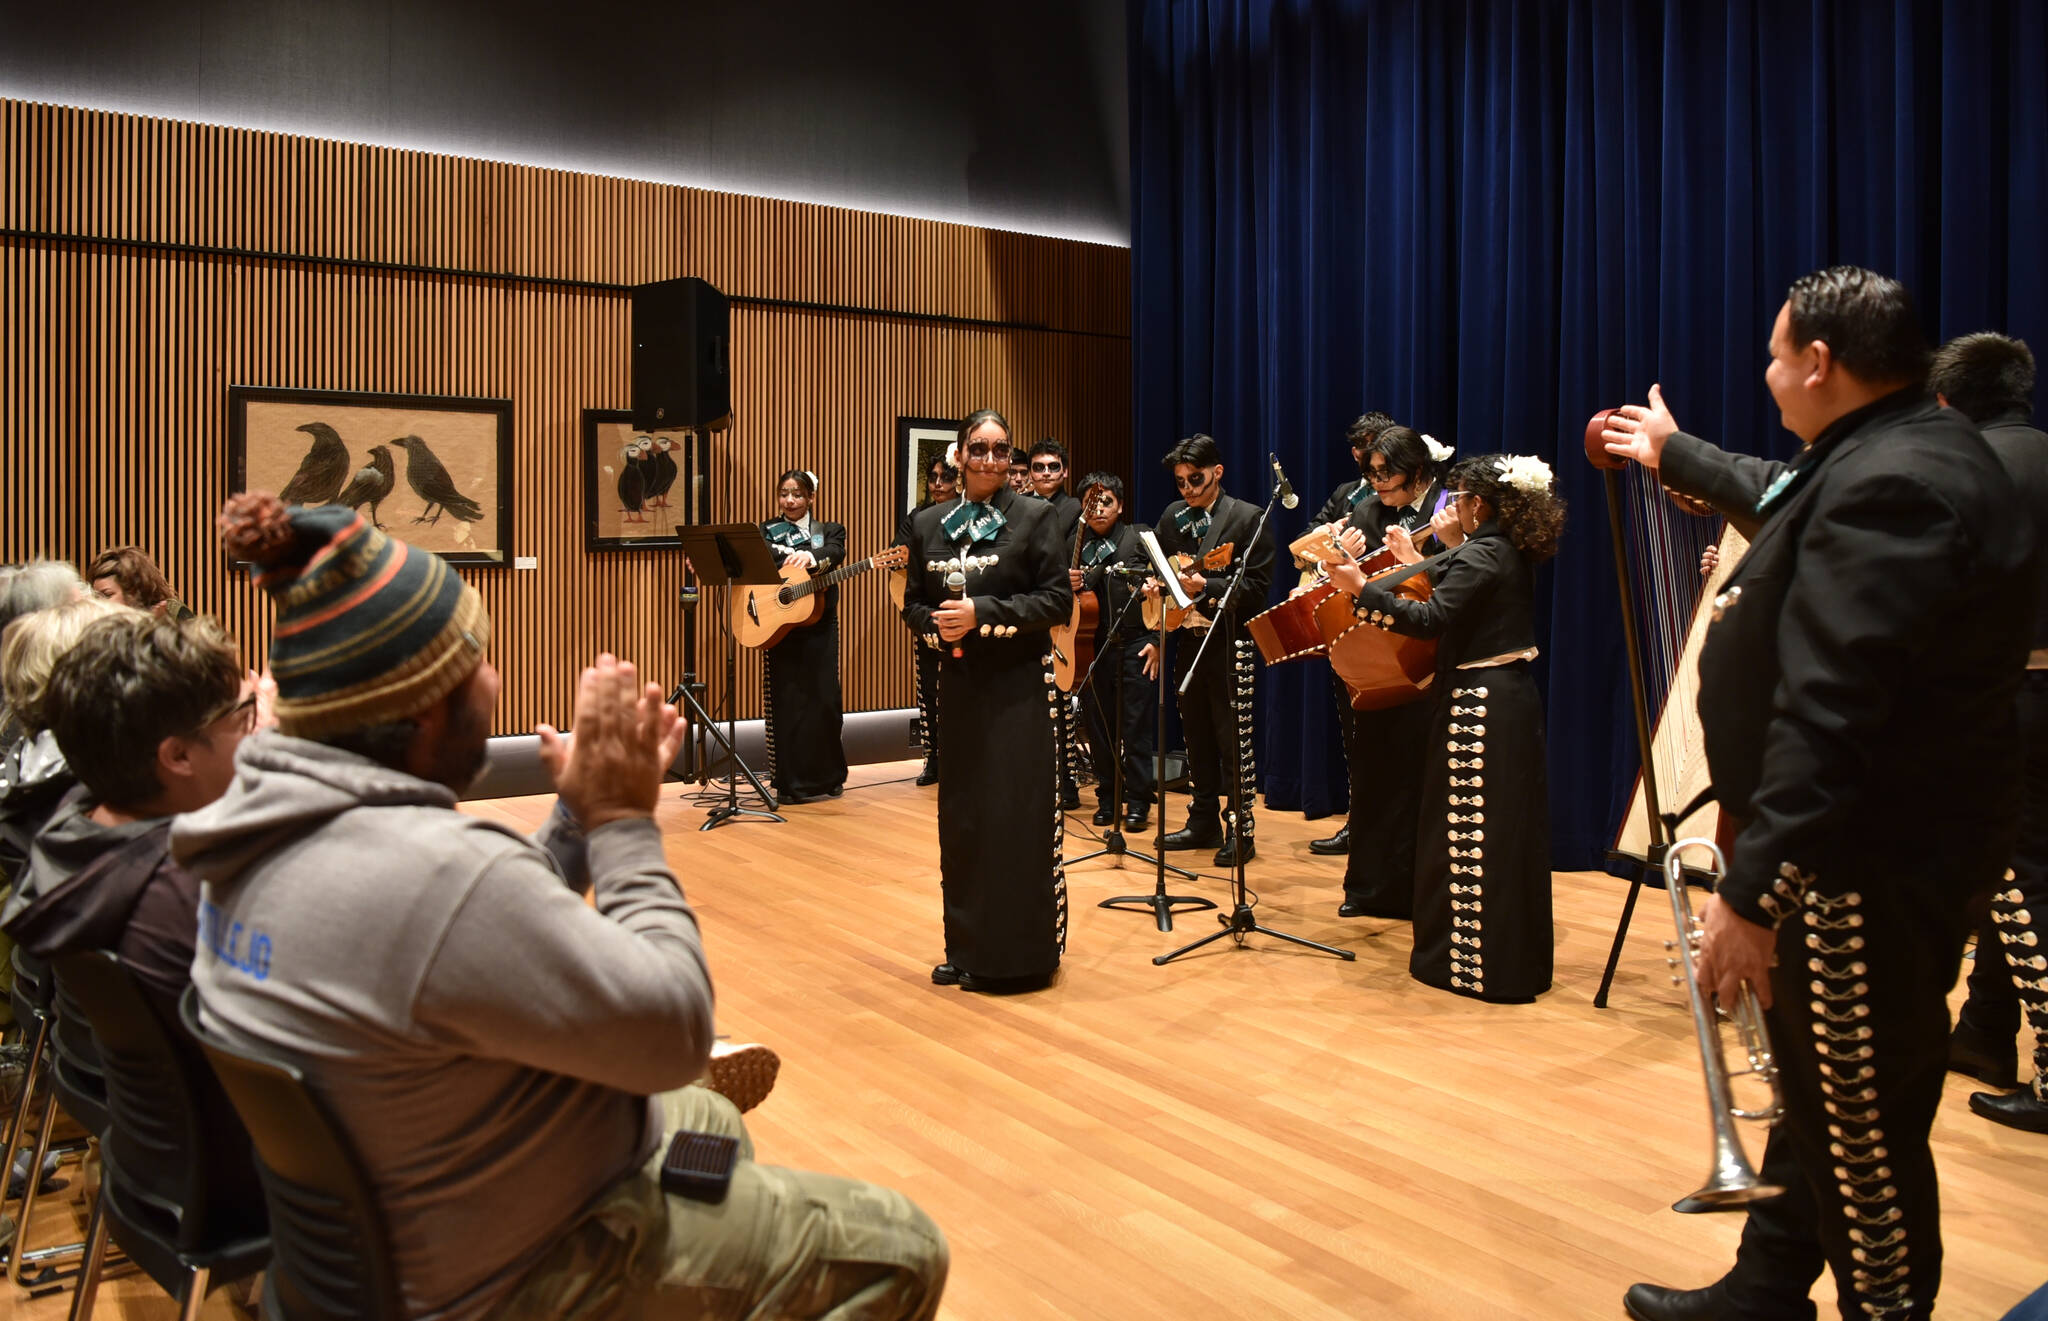 The Mount Vernon High School Mariachi and Folklorico performers give a concert on Bainbridge Island.